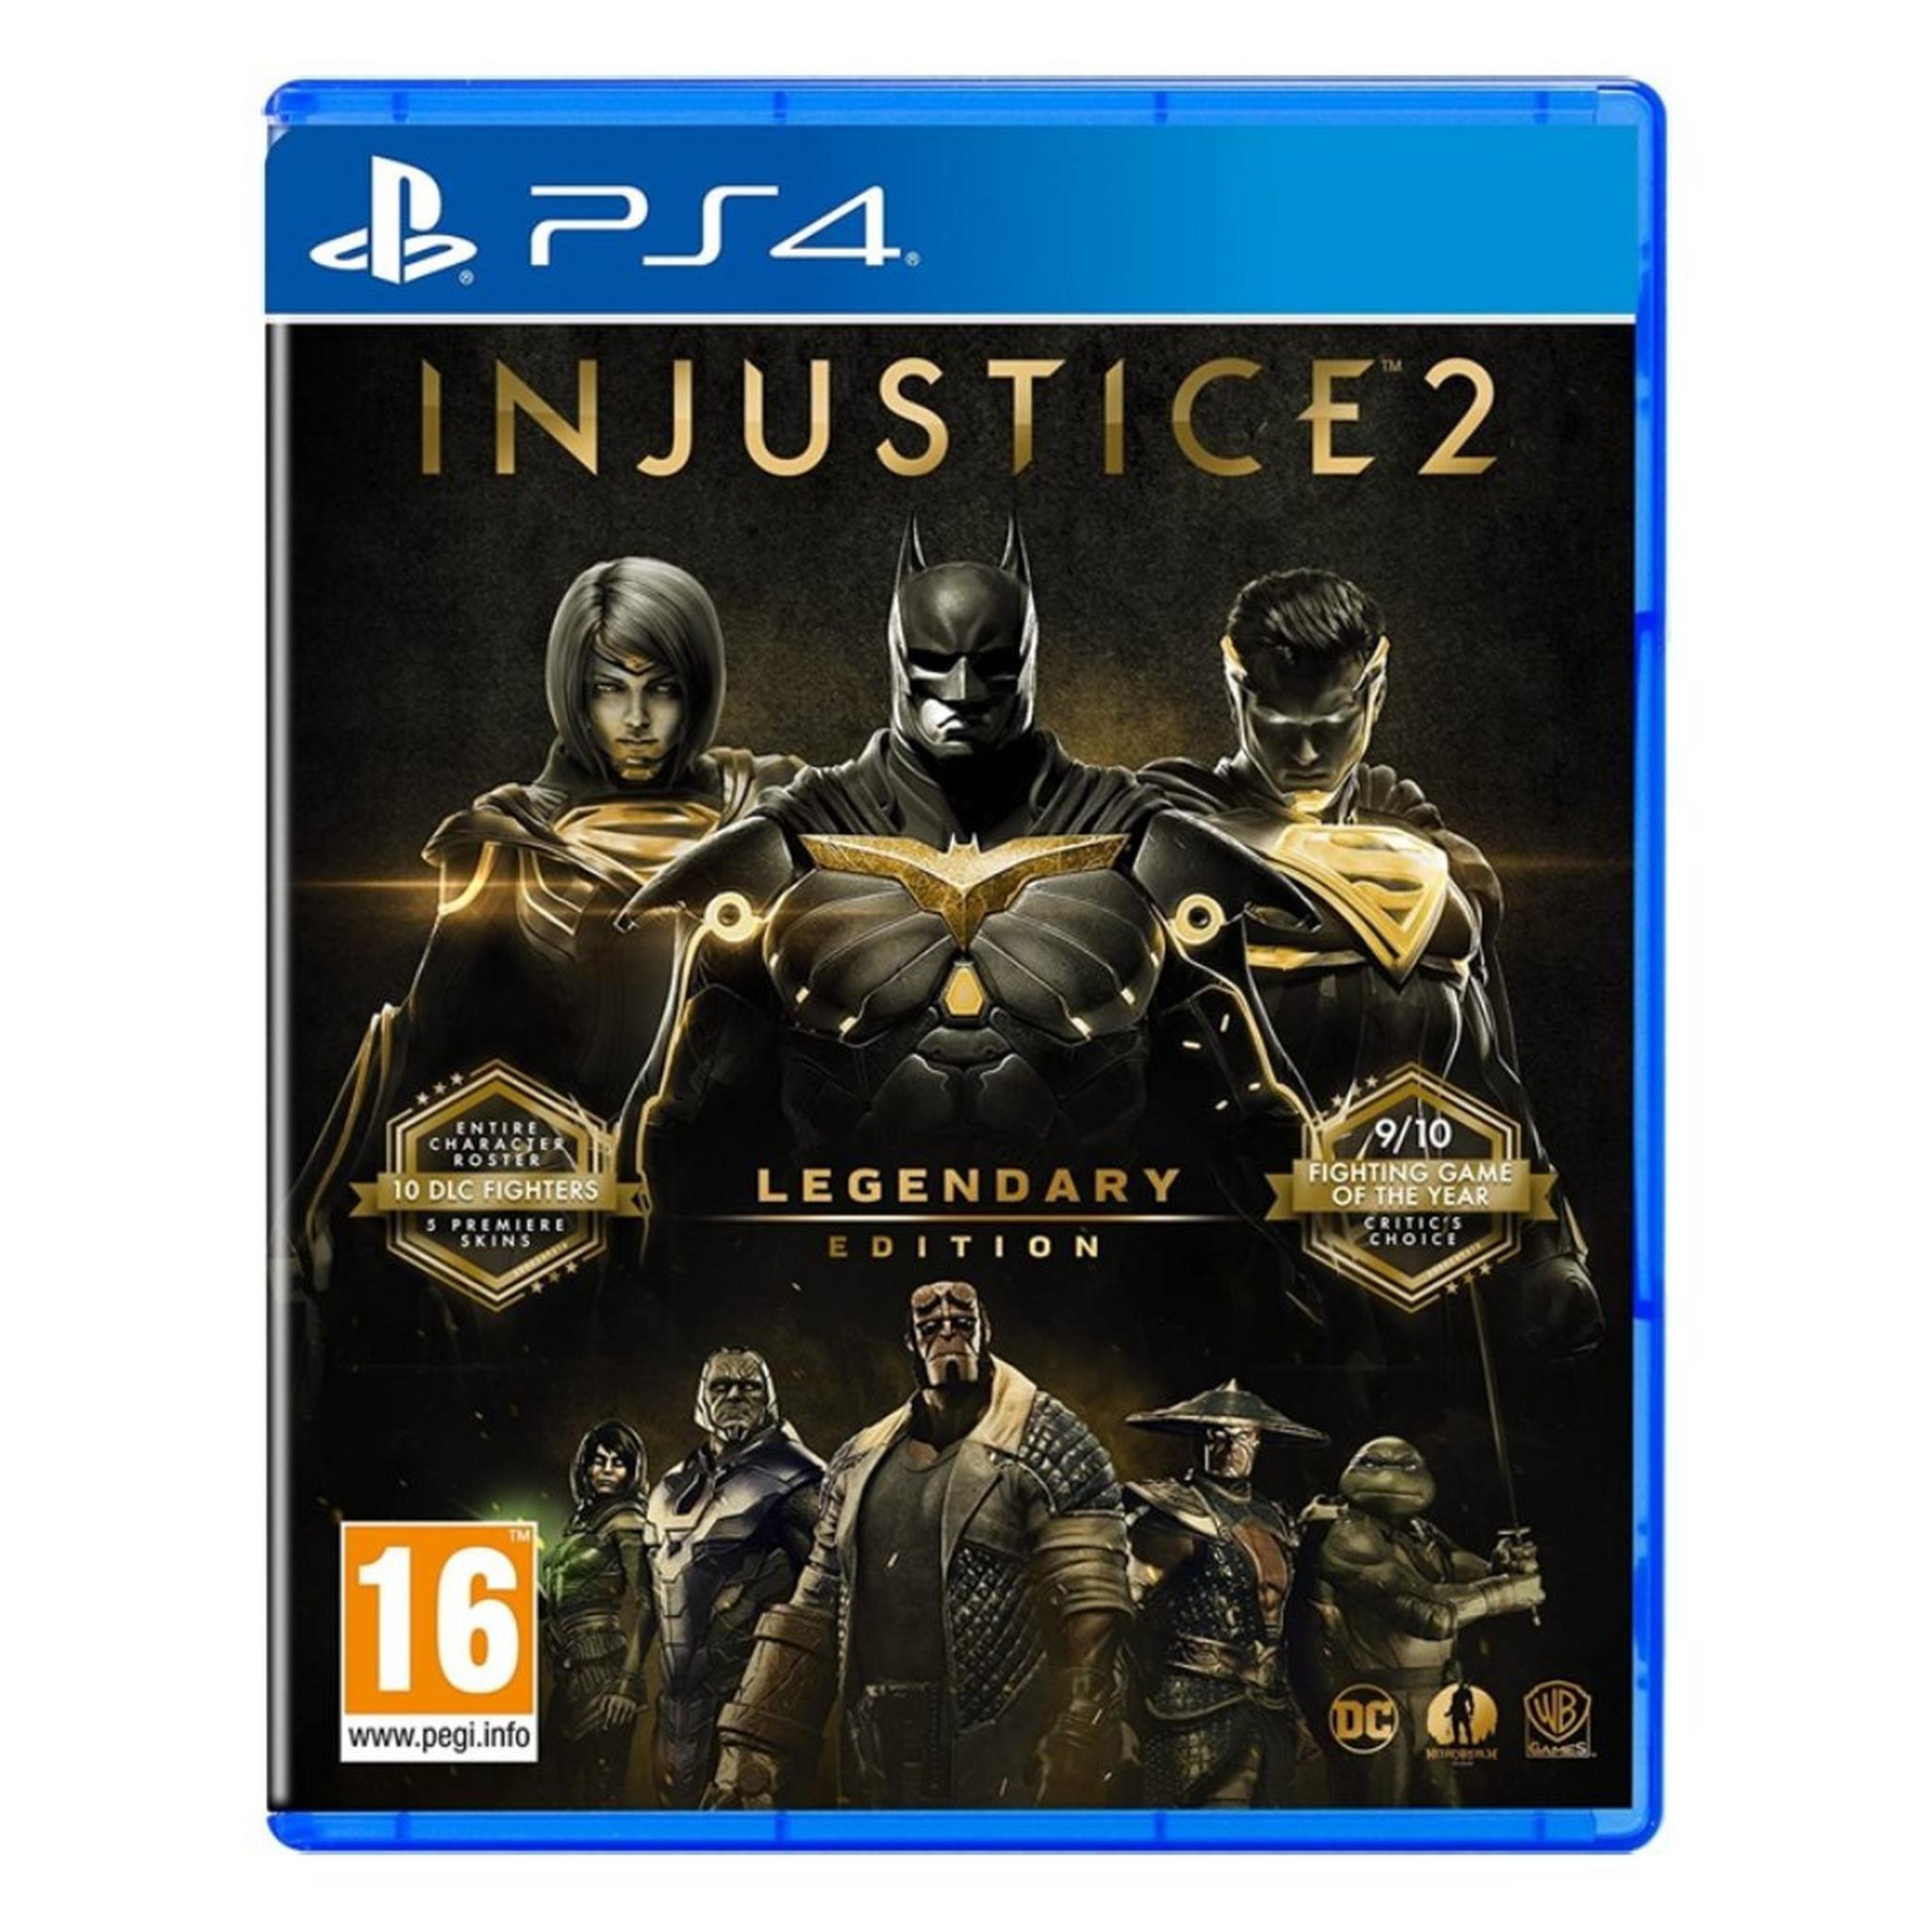 Injustice 2 - Legendary Edition - PS4 Game